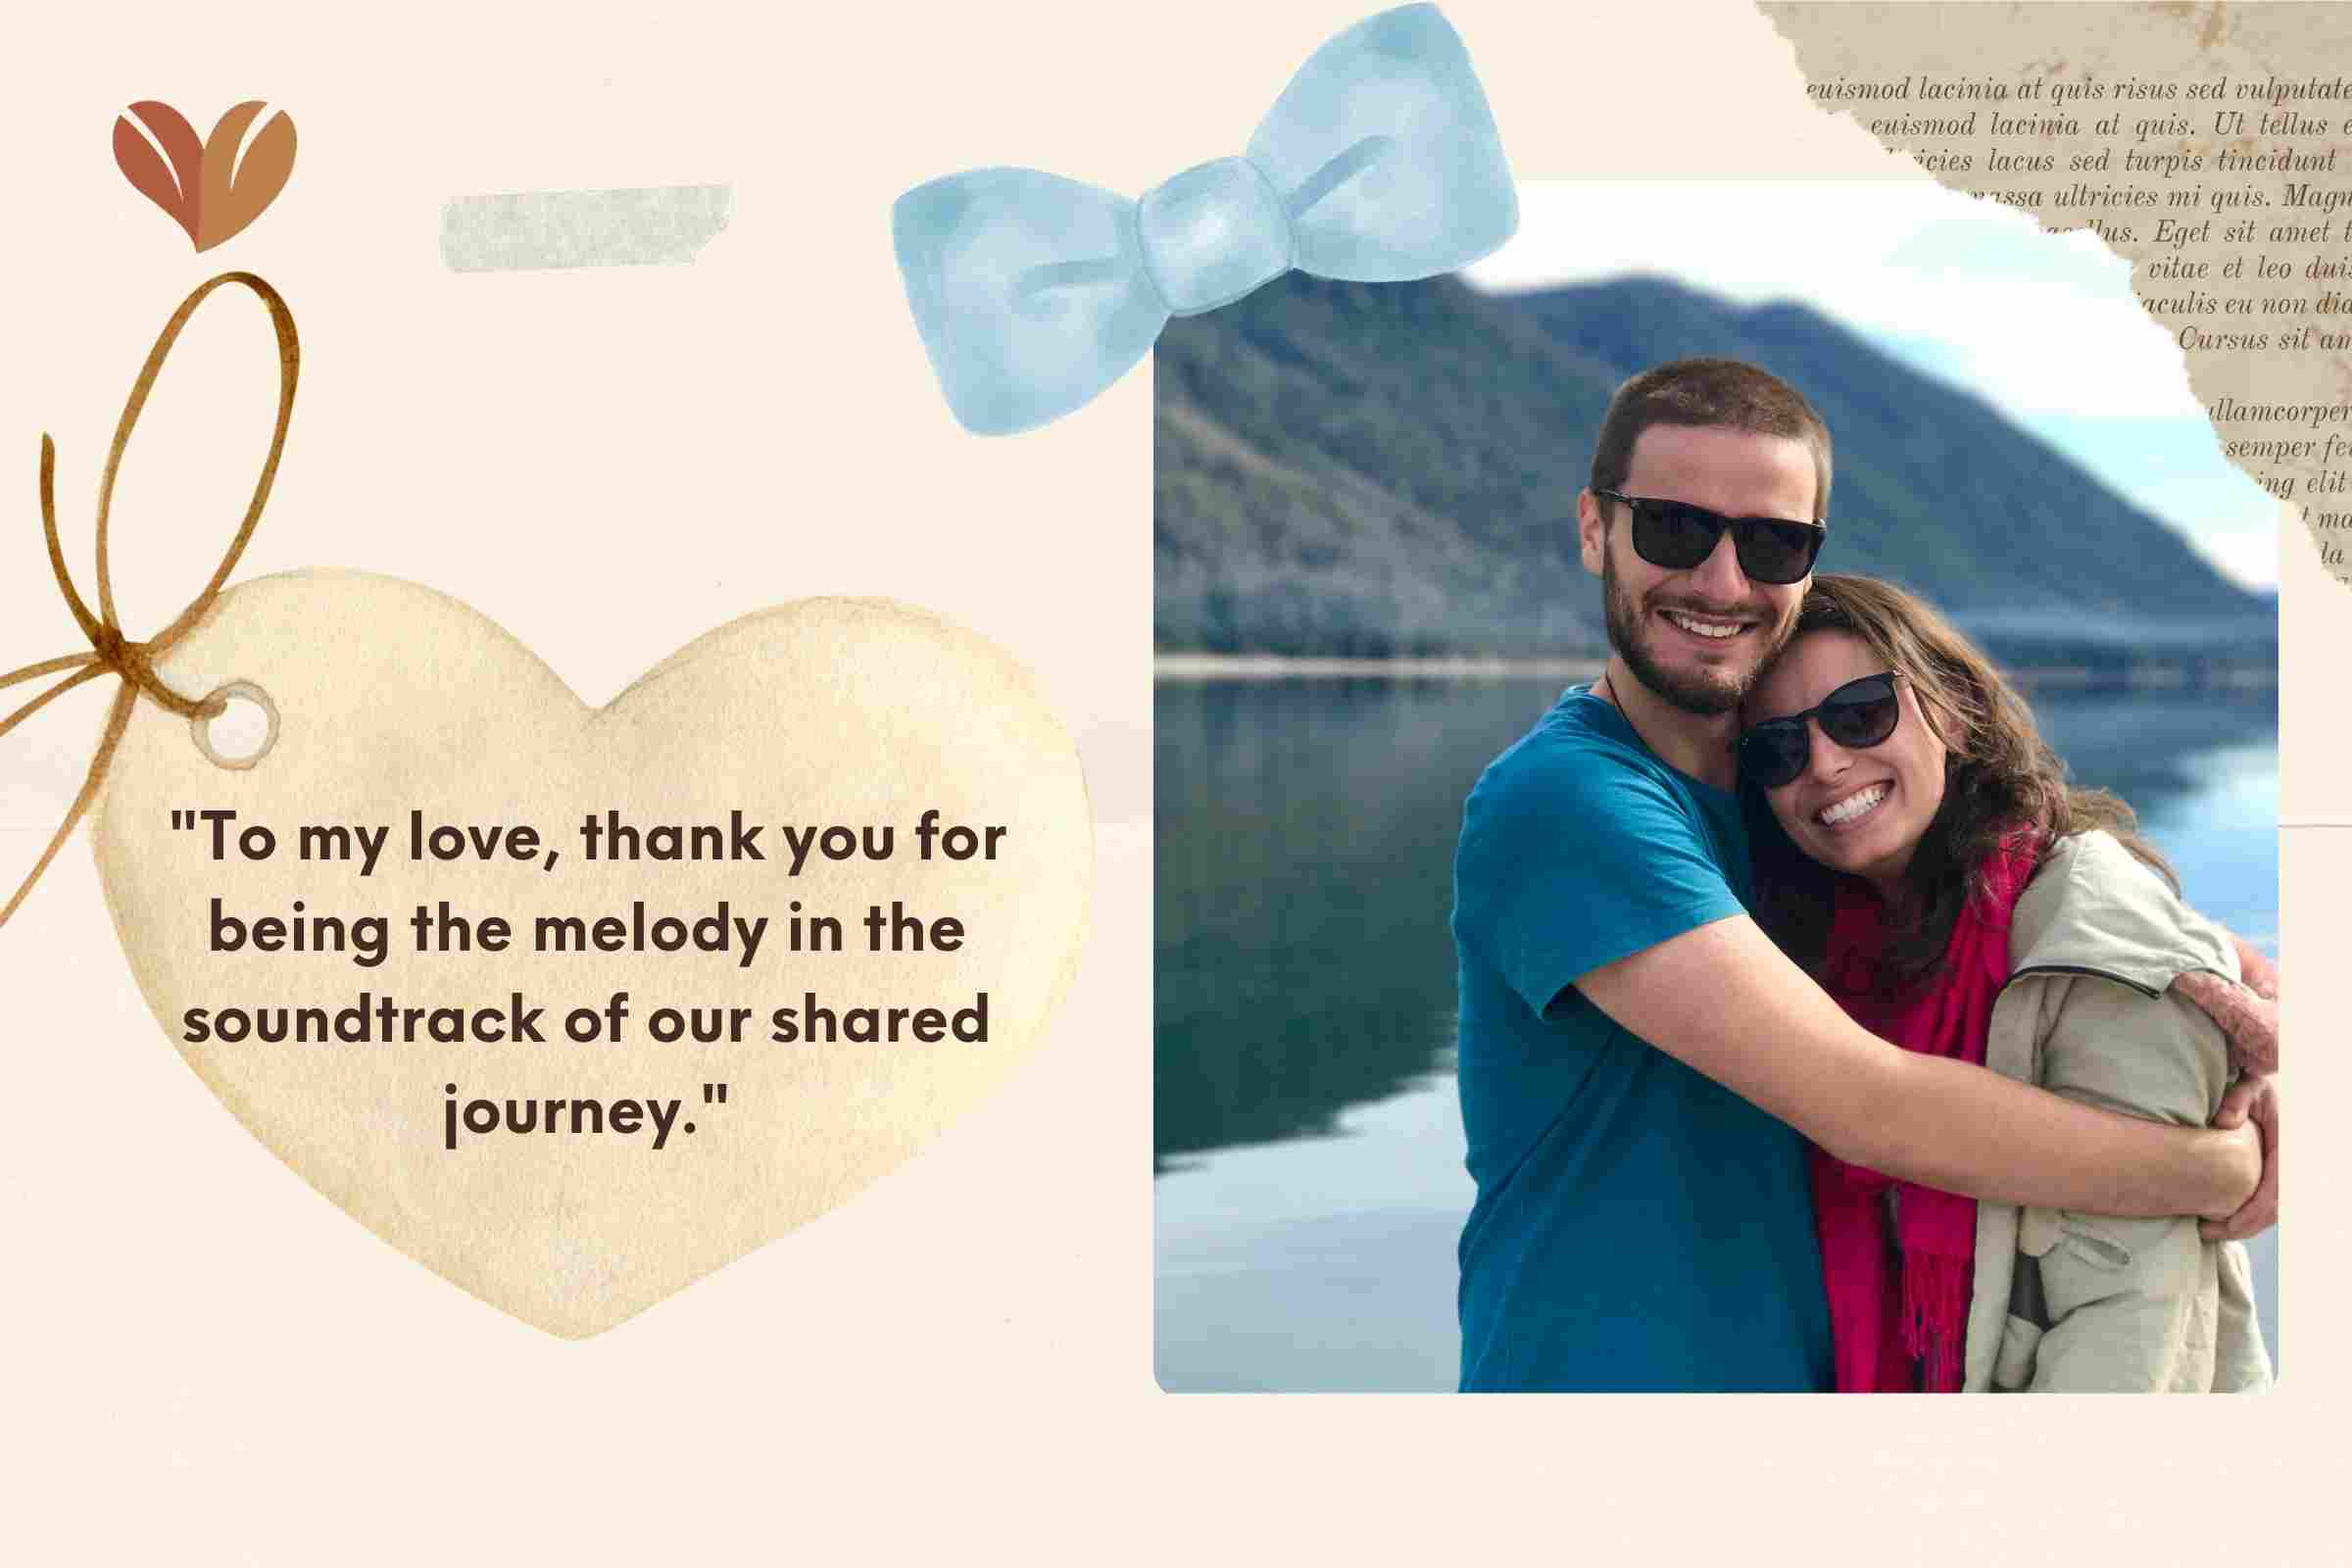 "To my love, thank you for being the melody in the soundtrack of our shared journey."